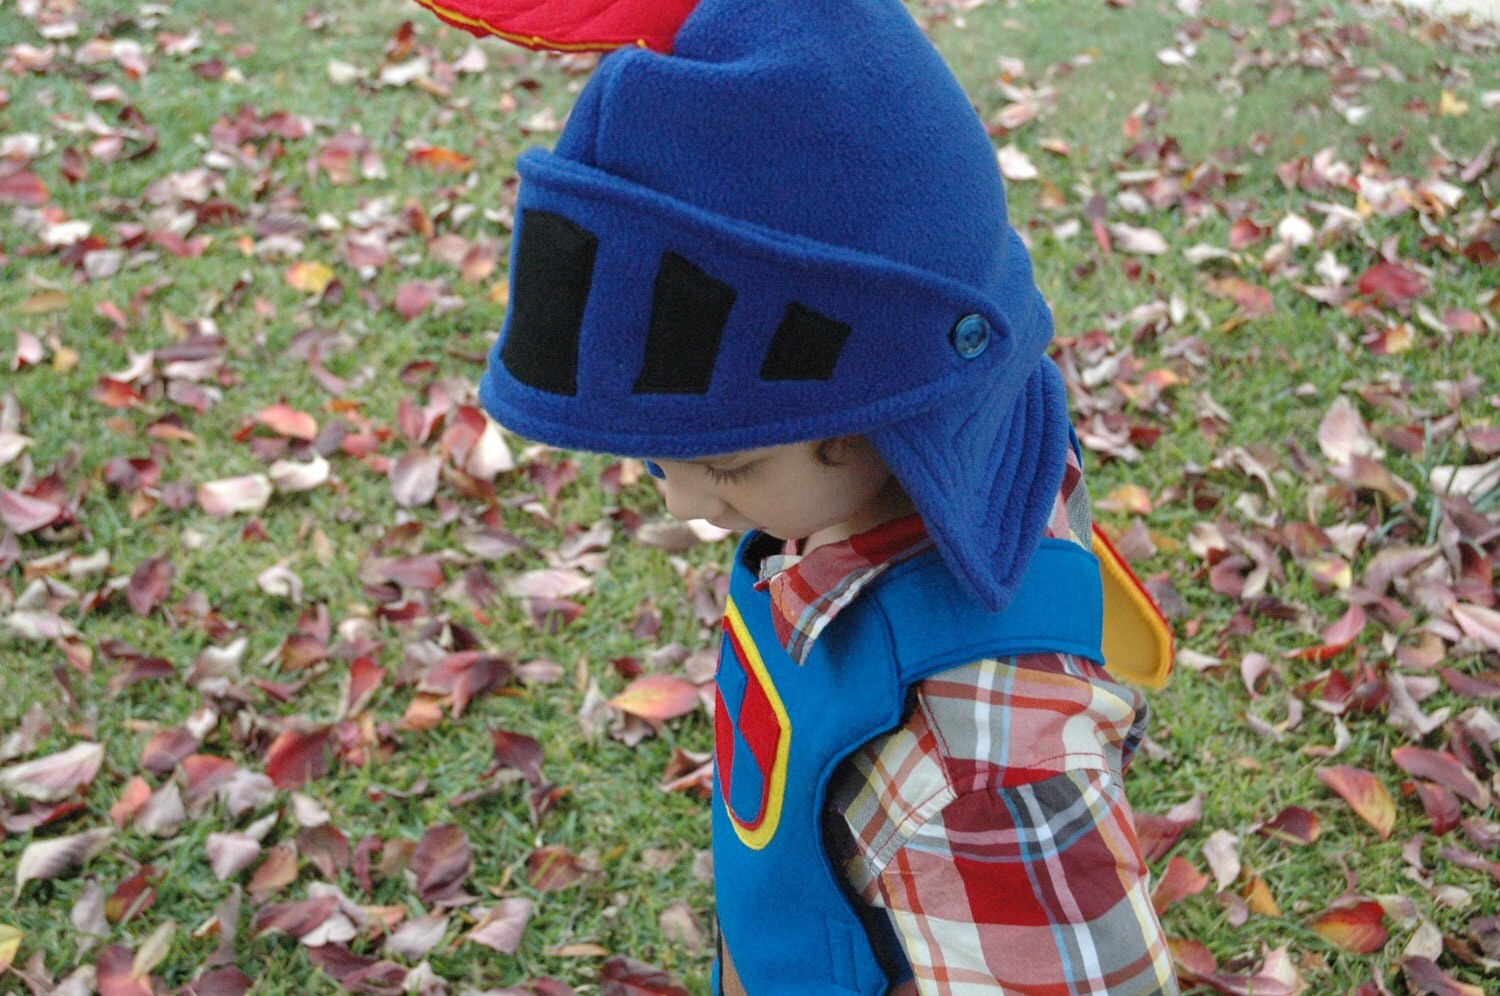 Mike The Knight Costume